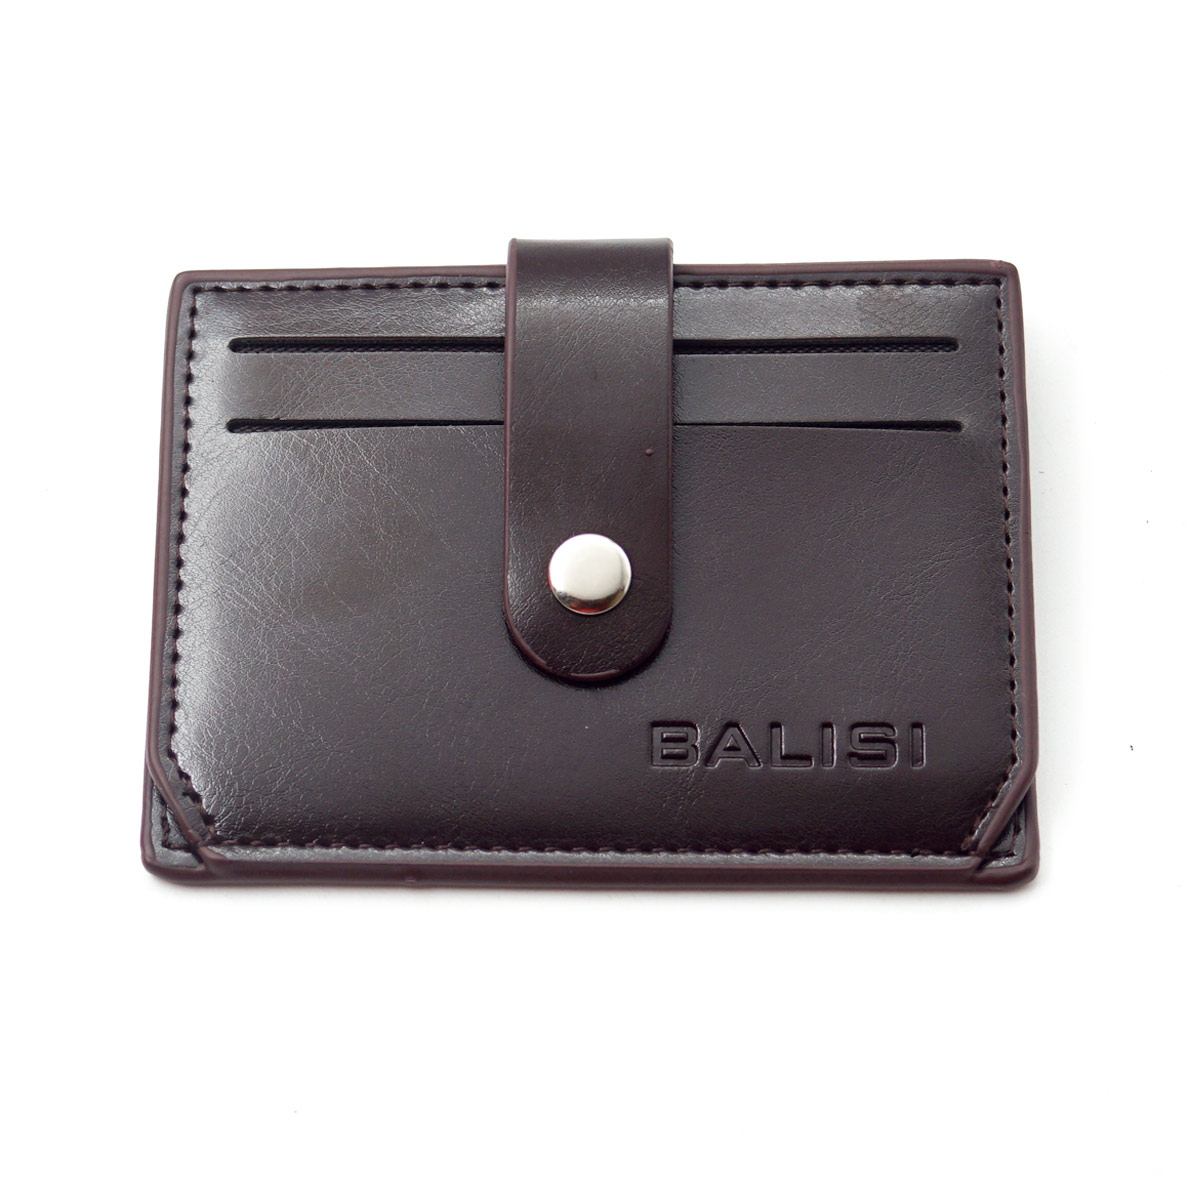 Balisi Glossy Brown Color Button Type Leather Purse SKU - 65096